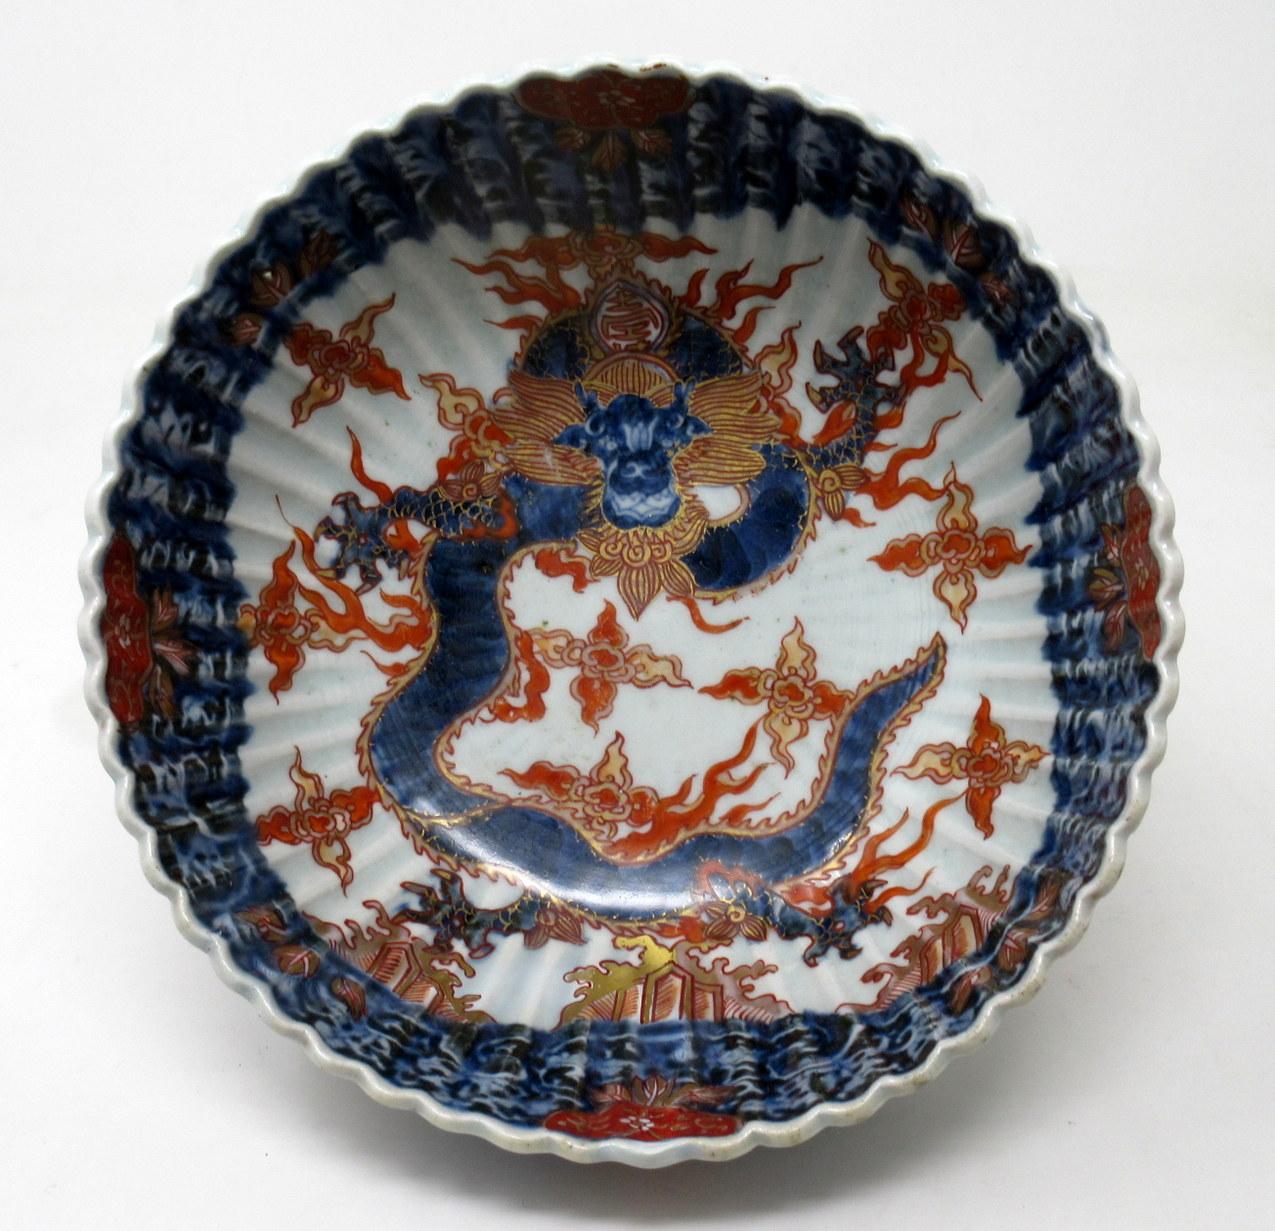 Stunning Japanese Fluted Circular Form Imari Deep Cabinet Bowl or Centerpiece of outstanding quality and medium proportions, made during the last quarter of the Nineteenth Century, unmarked but firmly attributed to Koransha Potteries.